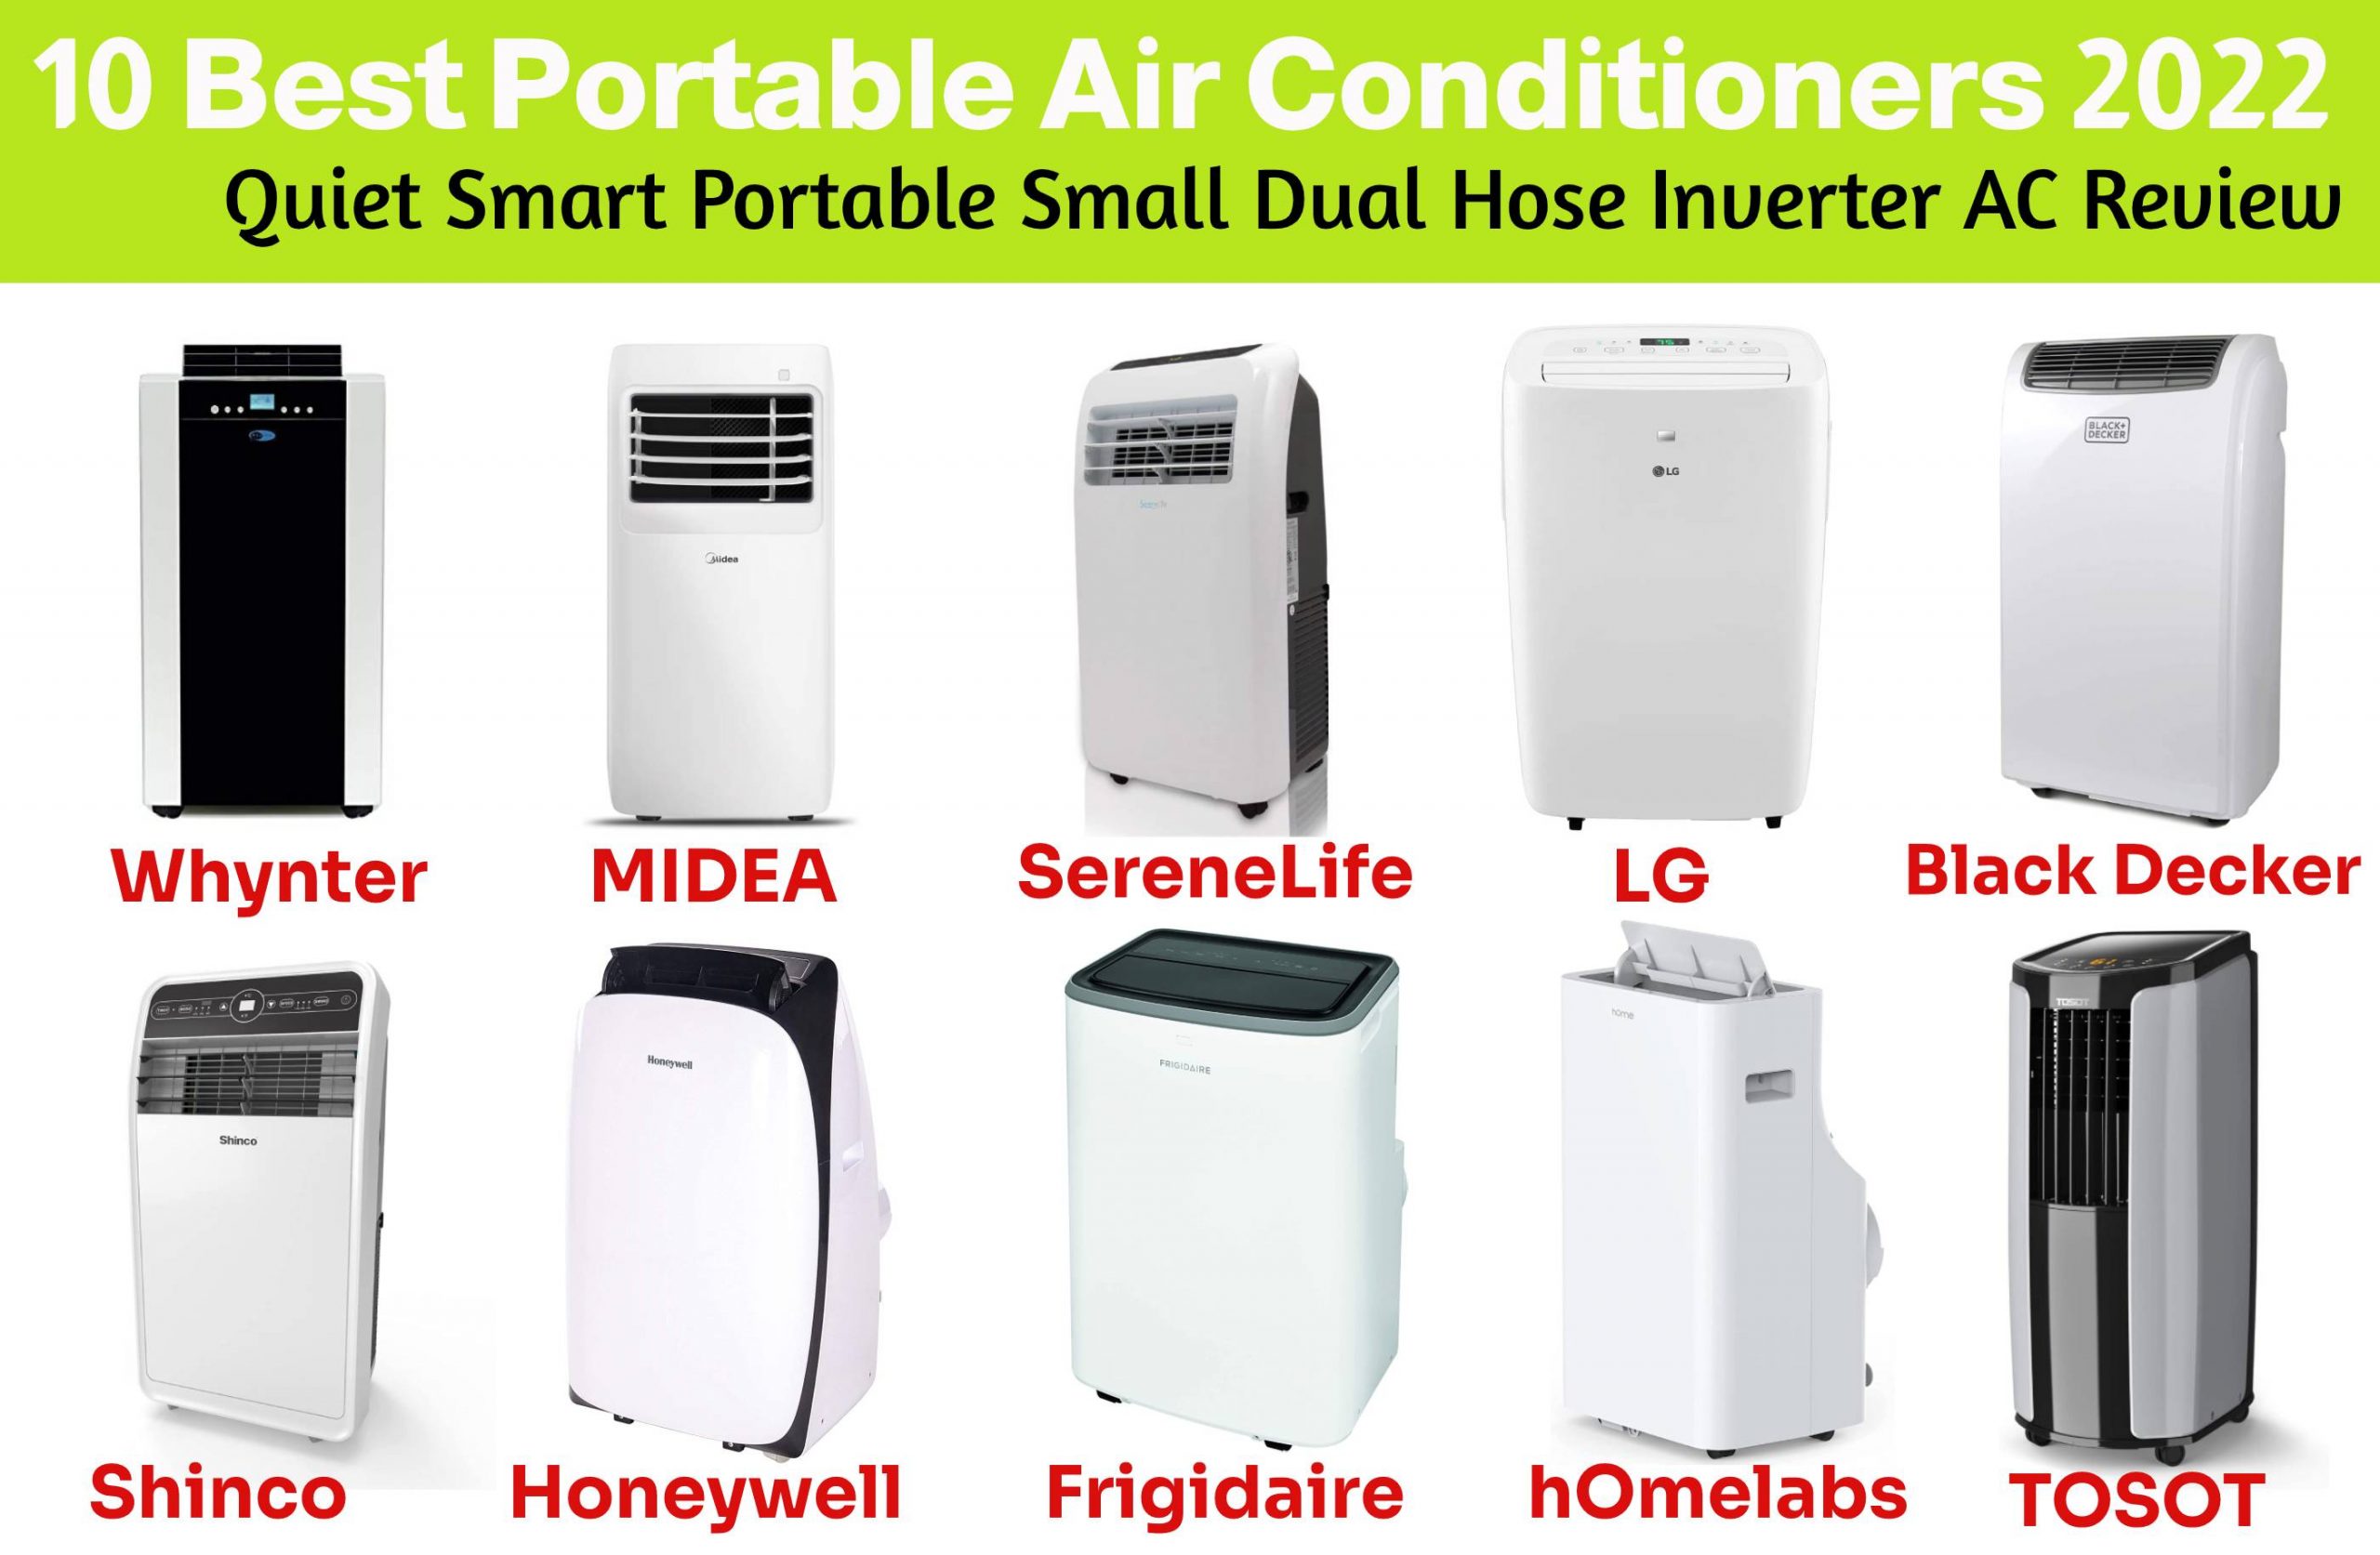 10 Best Portable Air Conditioners 2022 Quiet Smart Portable Small Dual Hose Inverter AC Review for Home, Bedroom,Rv, Camping, garage